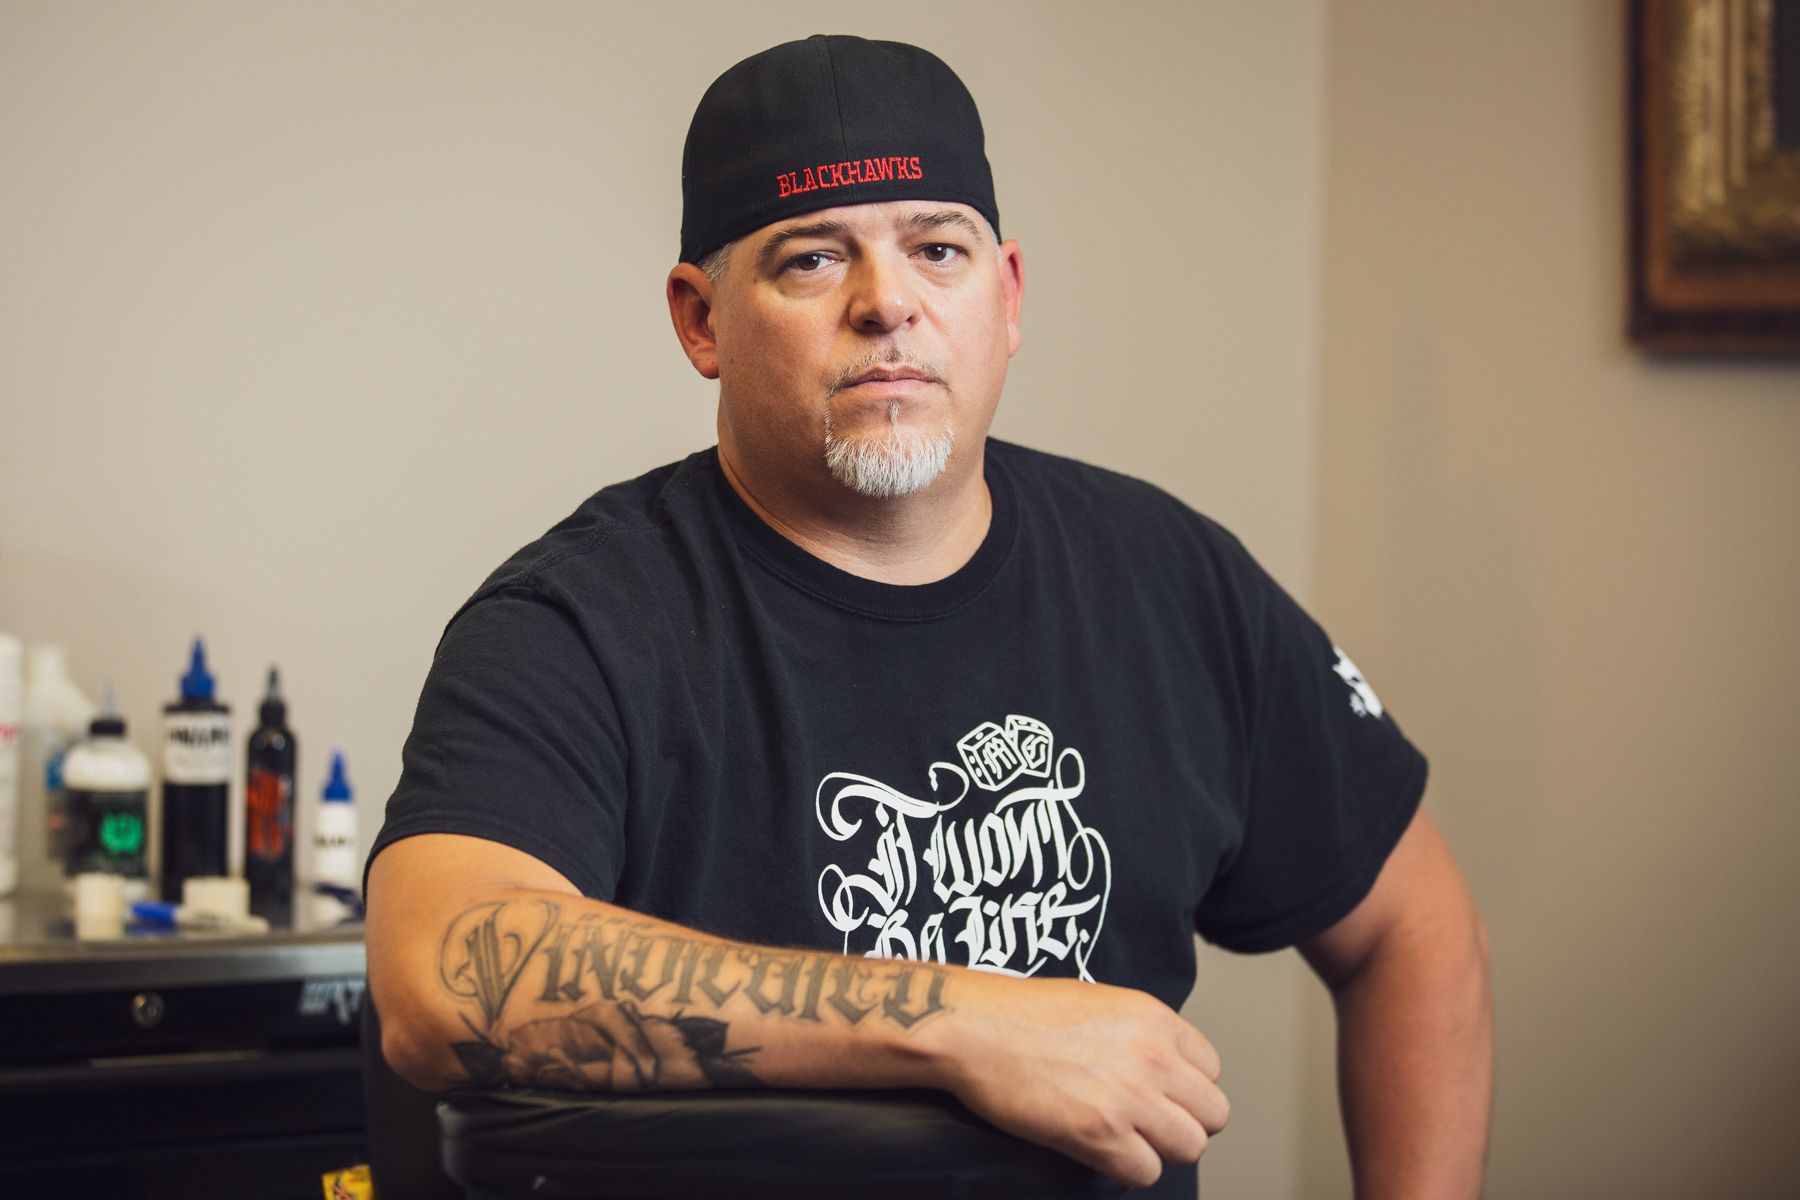 Image: A portrait of Matt Sopron at Dark Water Studio in Chicago, where he is on a tattoo apprenticeship. He wears a black t-shirt and backwards hat. His right arm rests on the arm of the chair, and partially visible is a large tattoo that says "Vindicated" on his arm. Photograph by Kristie Kahns.